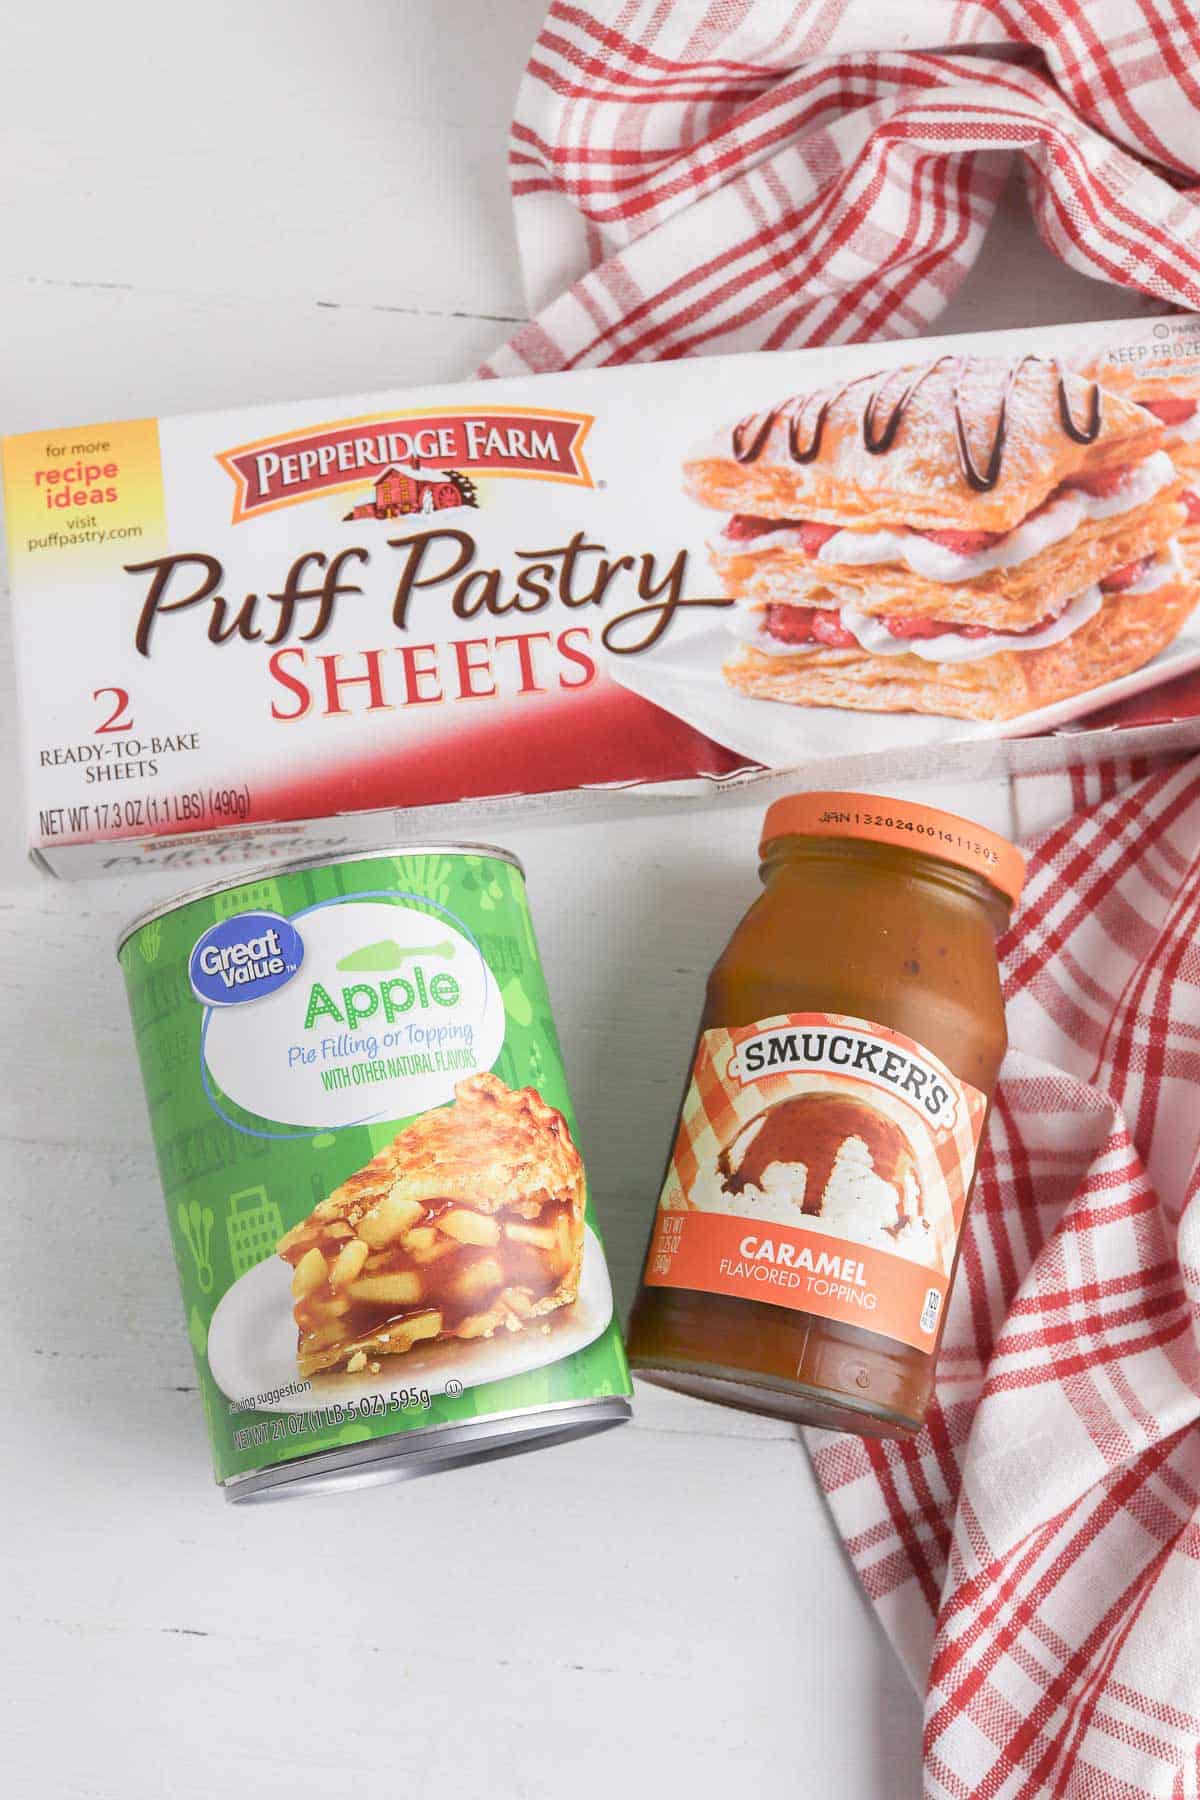 box of puff pastry sheets, can of apple pie filling and a jar of caramel sauce.